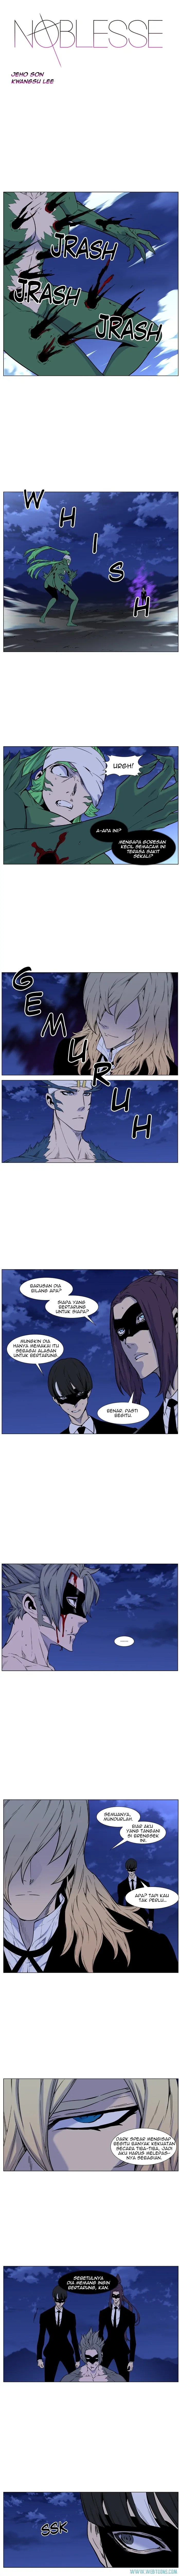 Noblesse Chapter 458 - 73